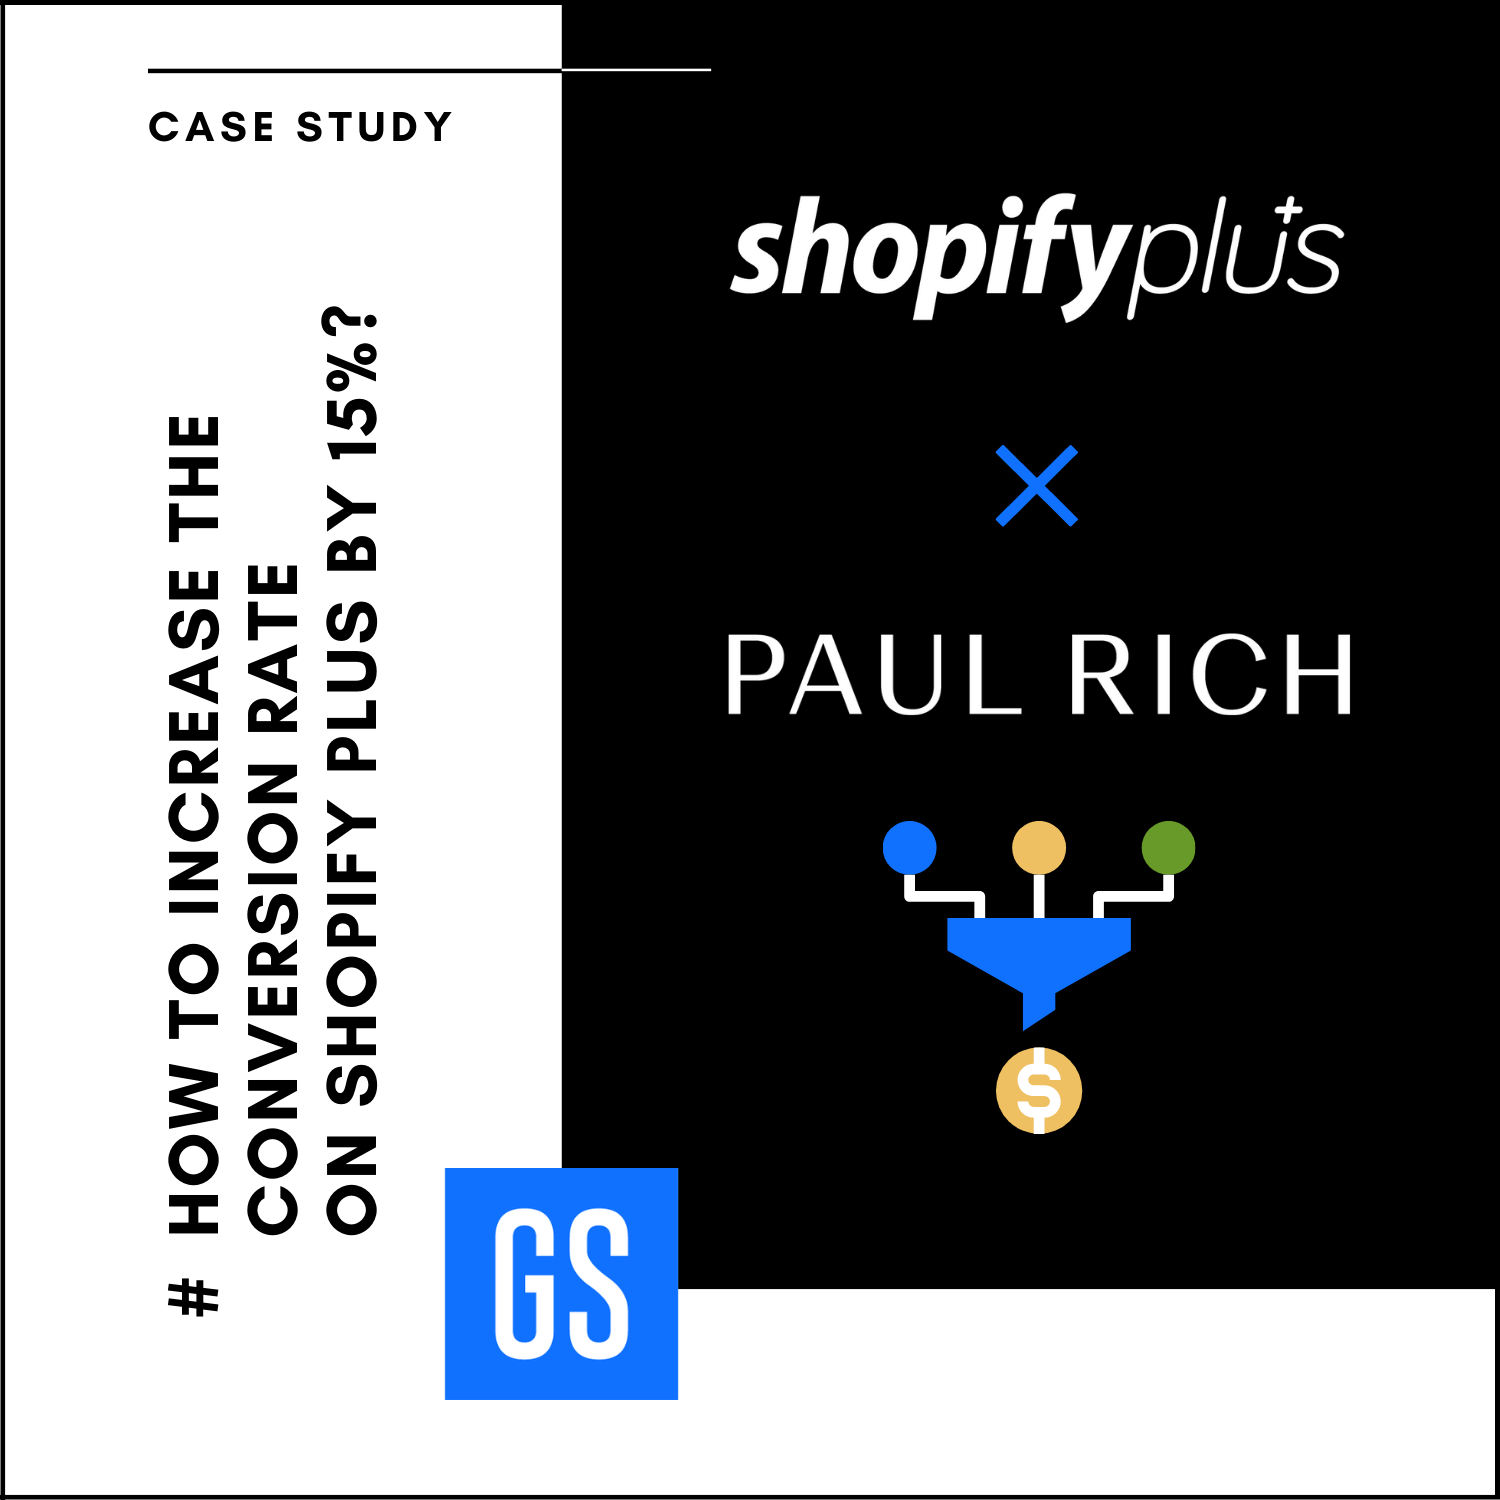 How to increase the conversion rate on Shopify Plus by 15%?